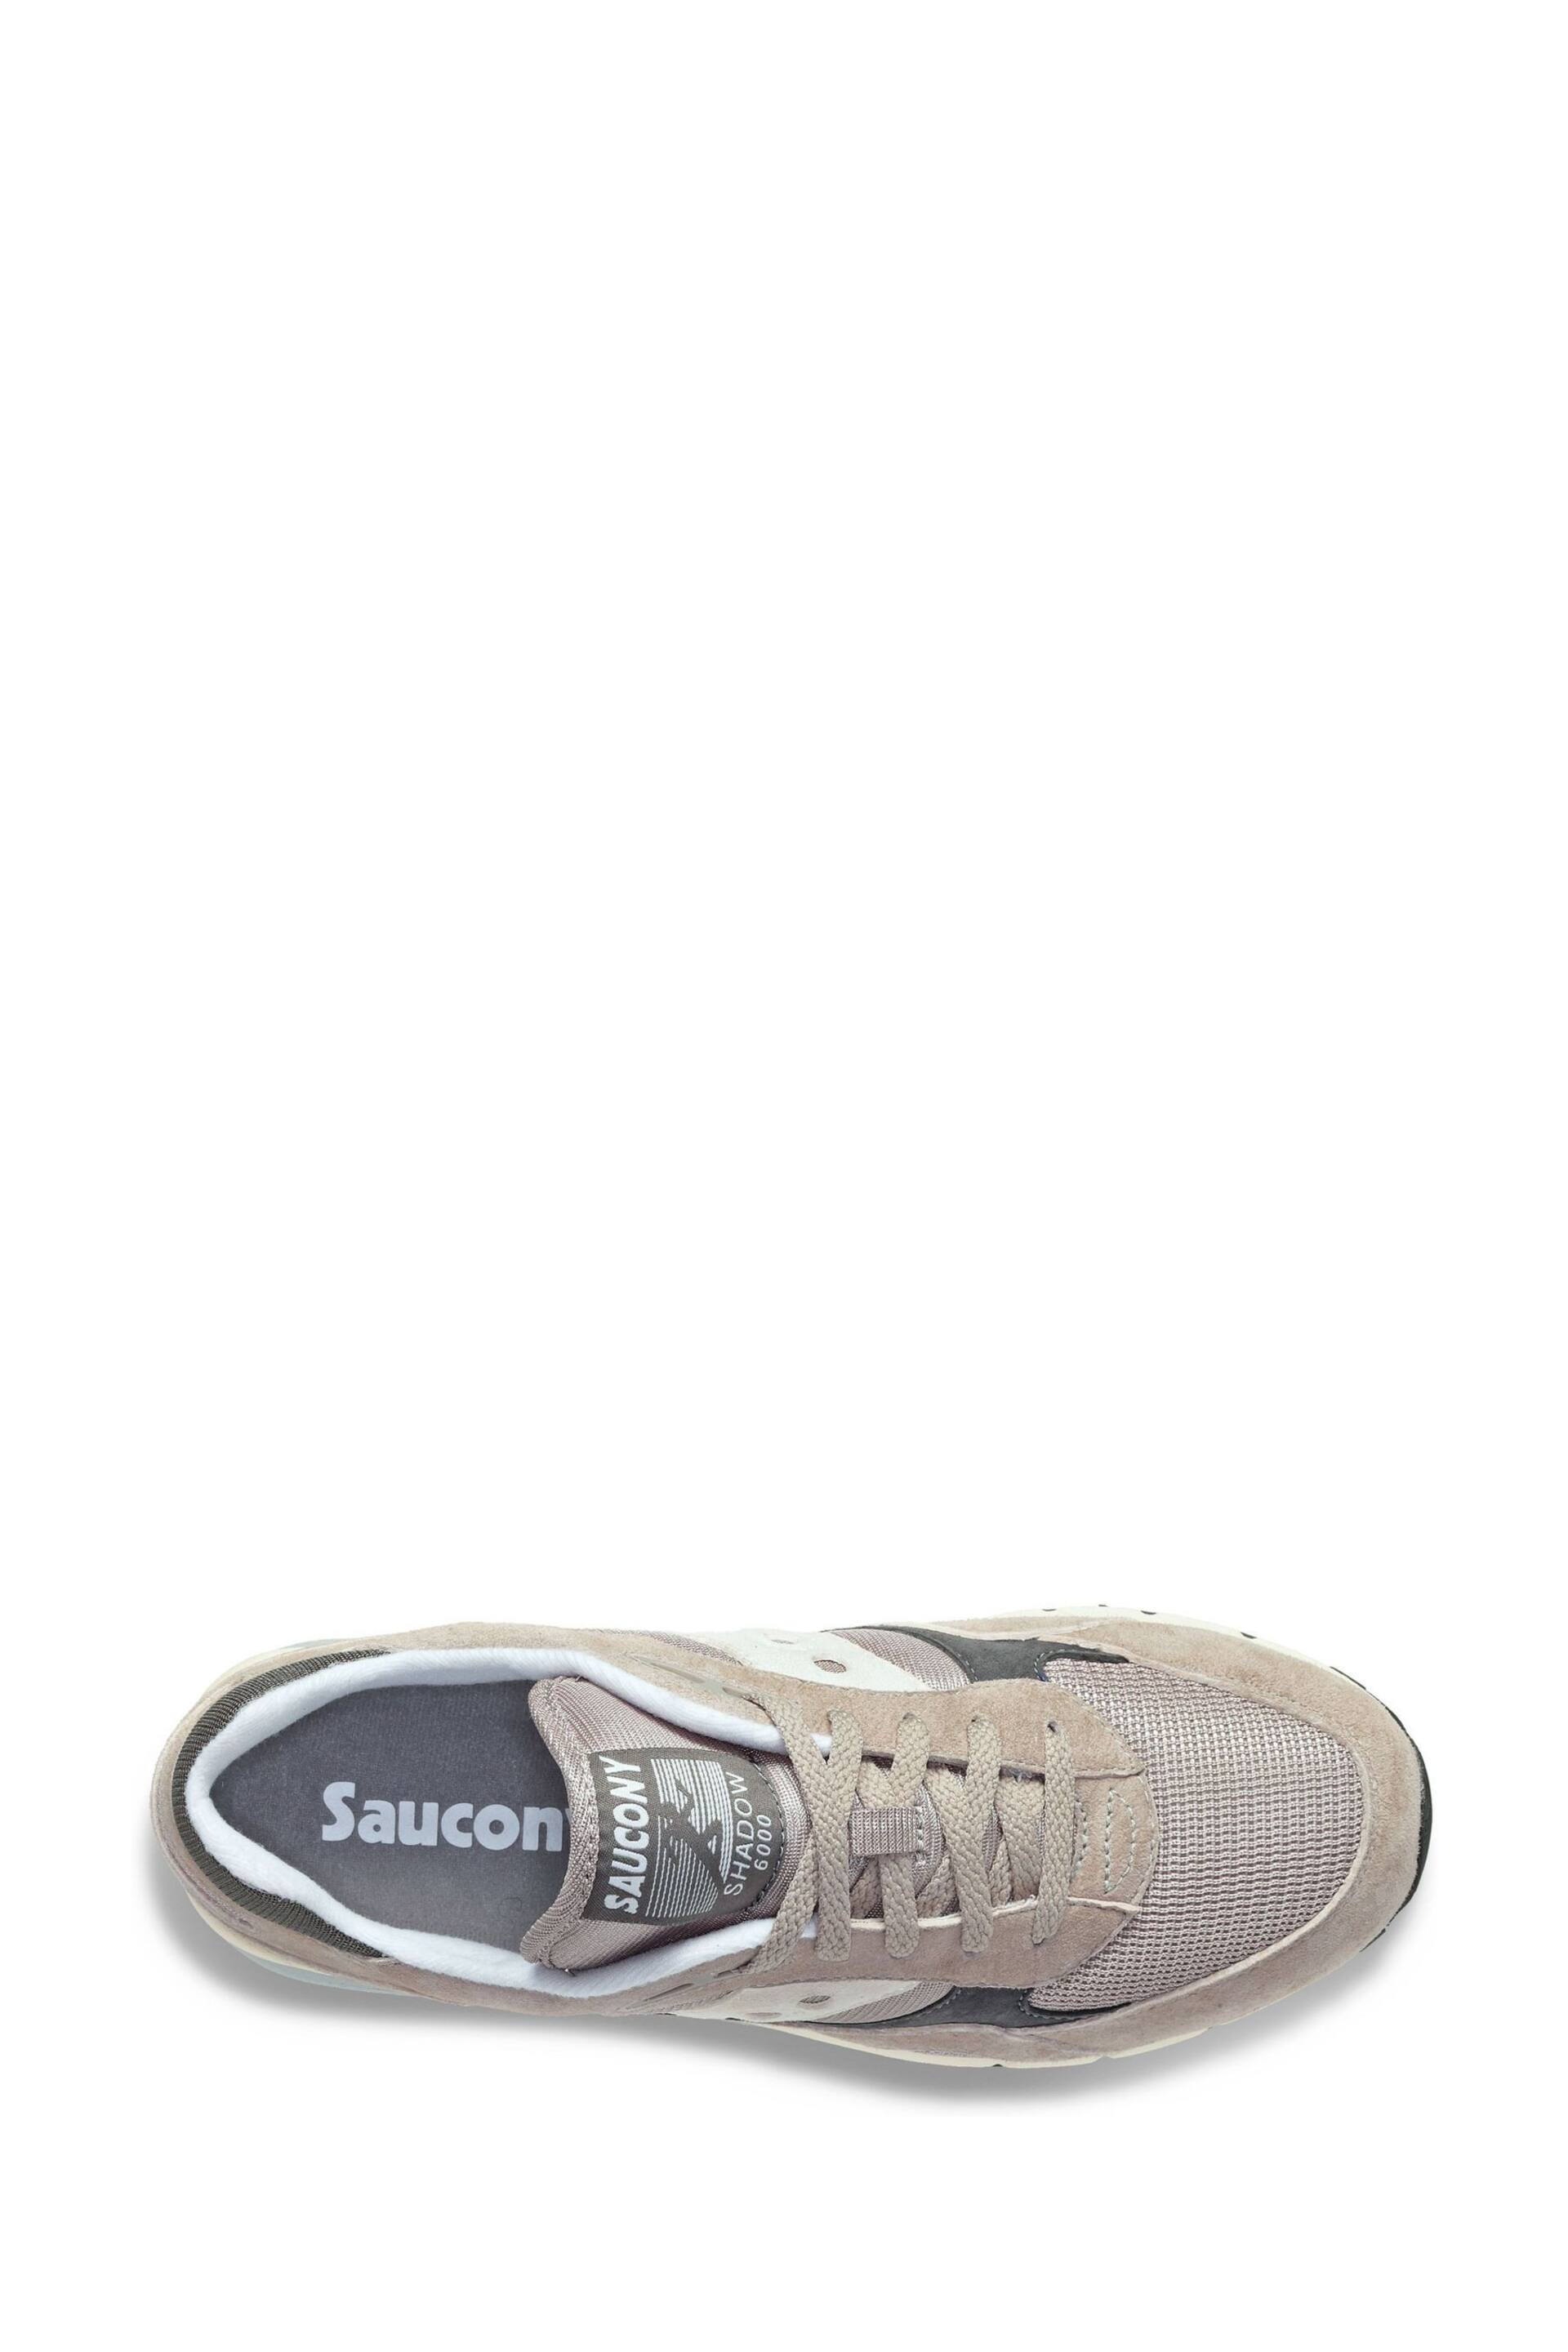 Saucony Grey Shadow 6000 Trainers - Image 4 of 5